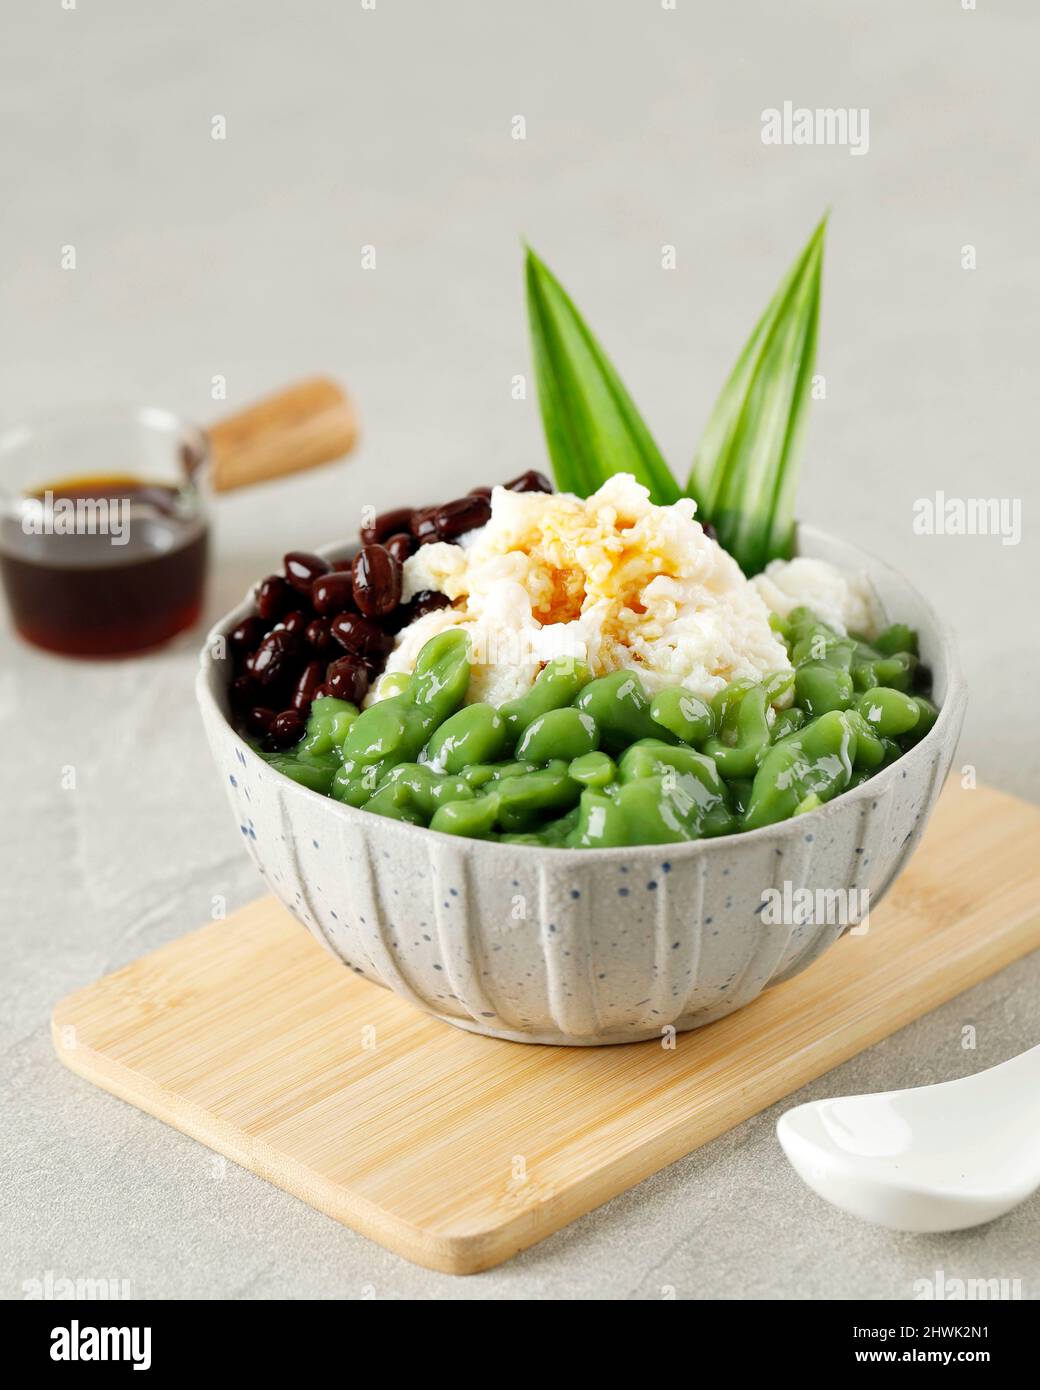 Malaysian Desserts Called Cendol. Cendol is Made From Crushed Ice Cubes, Red Bean. Also Popular in SIngapore Stock Photo